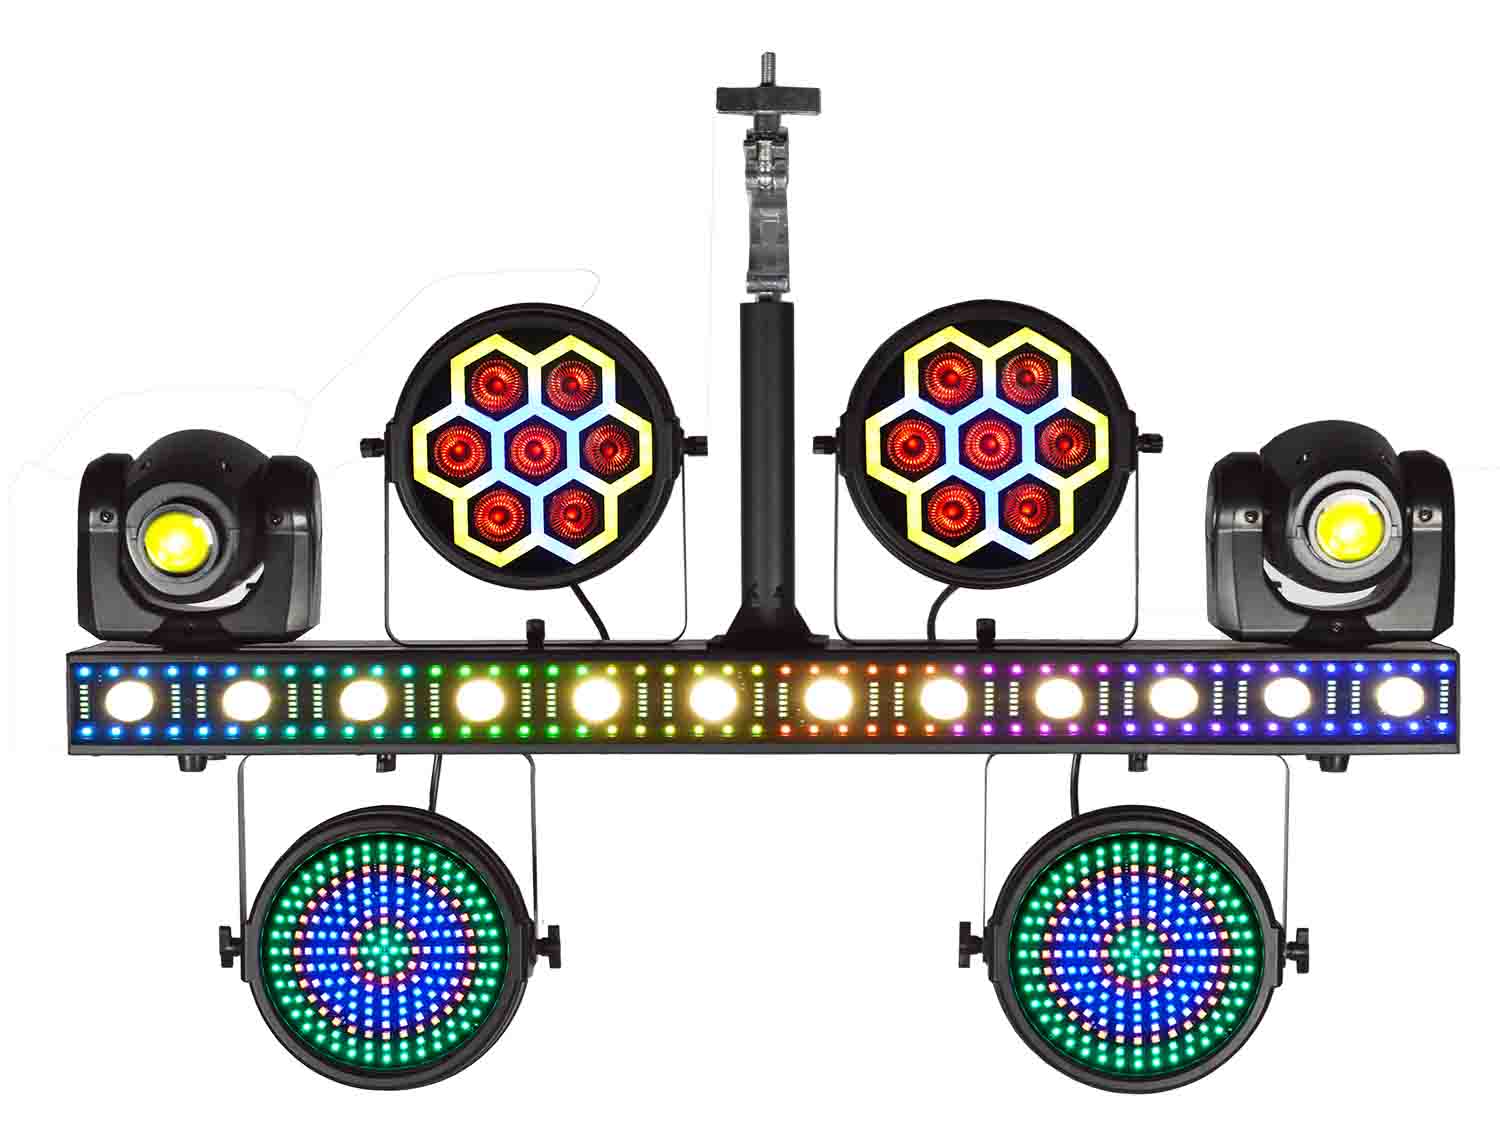 JMAZ JZ2008 Versa Flex Bar All-In-One Lighting System with 2 Movers and FX Bar - Hollywood DJ